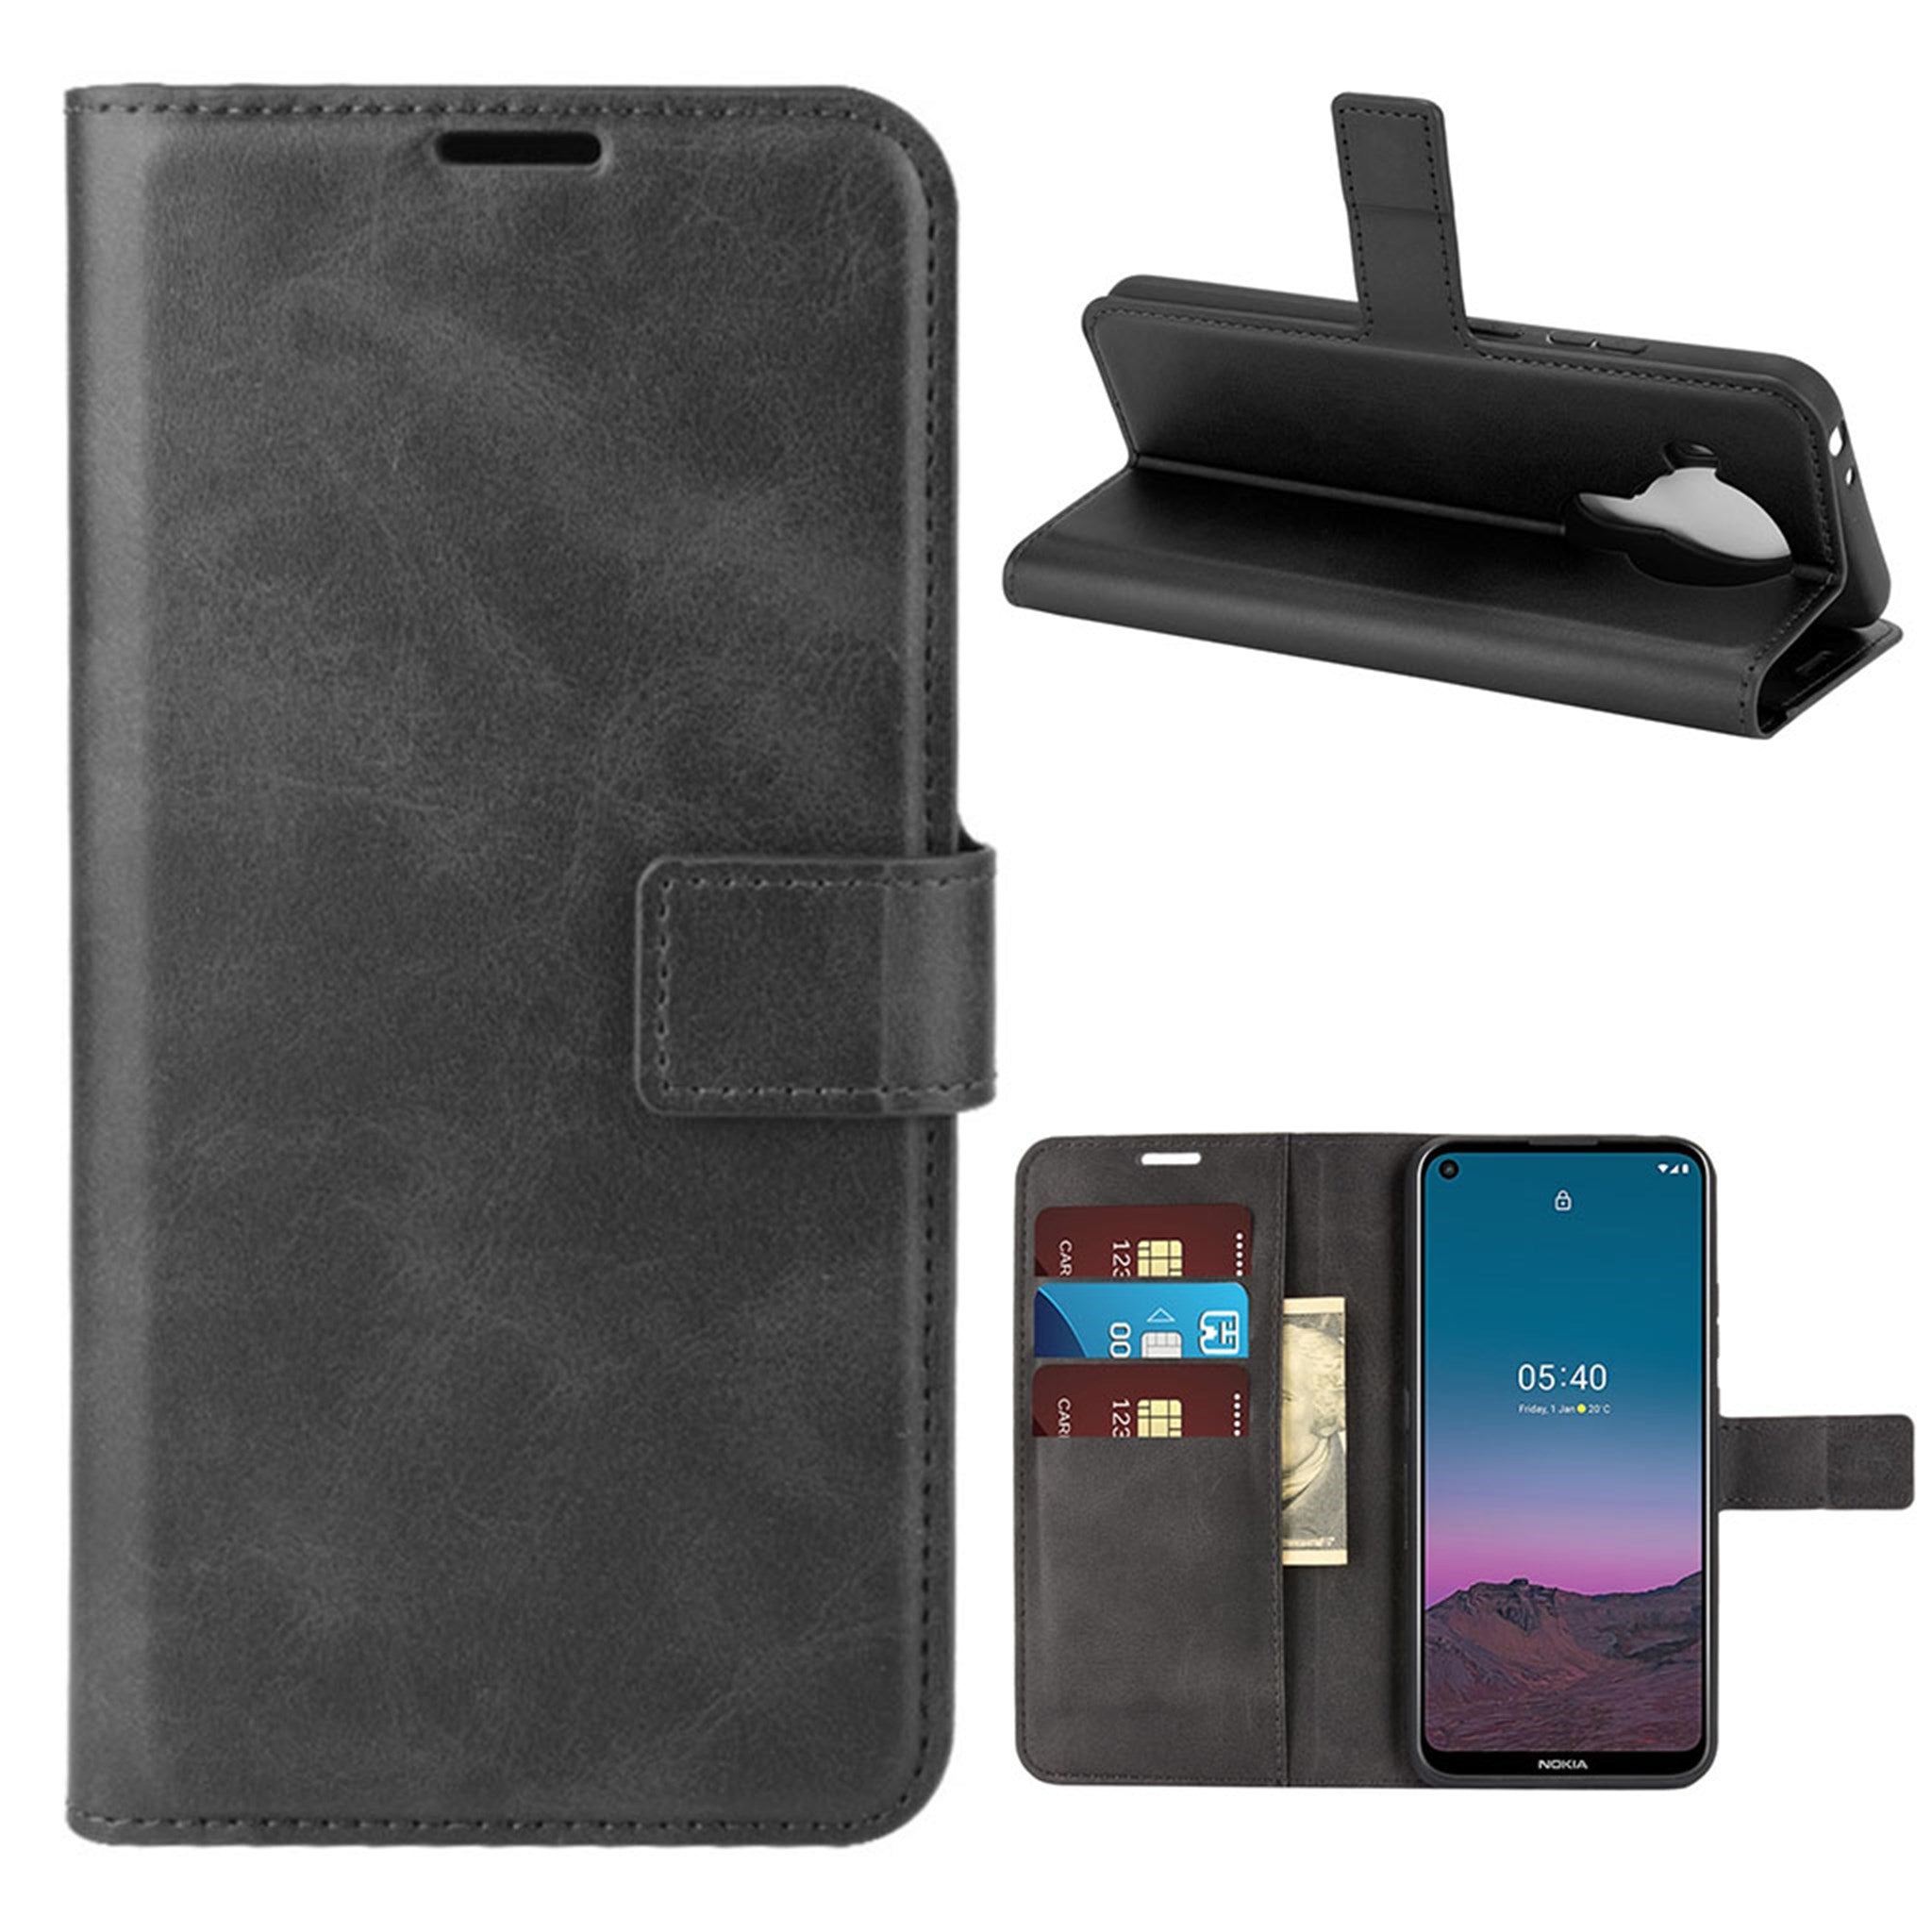 Wallet-style leather case for Nokia 5.4 - Black